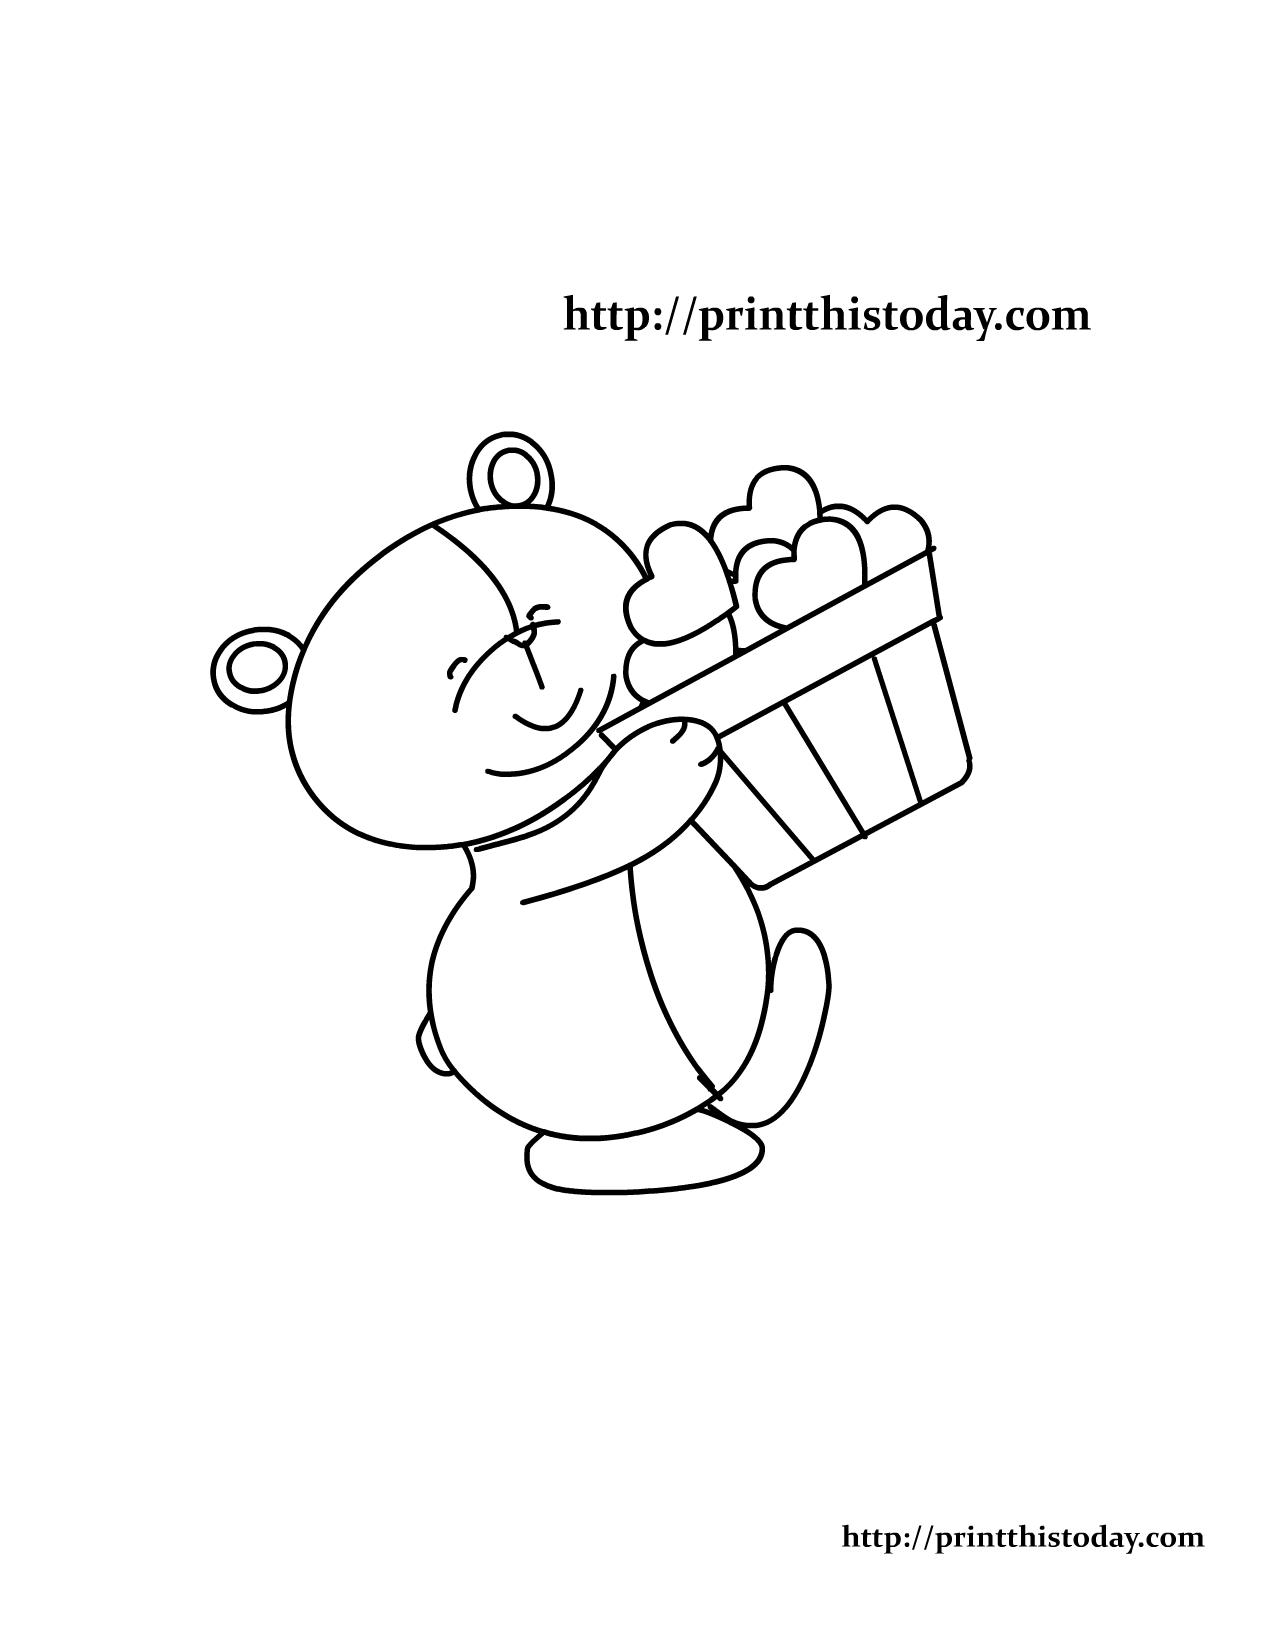 Free Printable Teddy Bear Coloring Pages